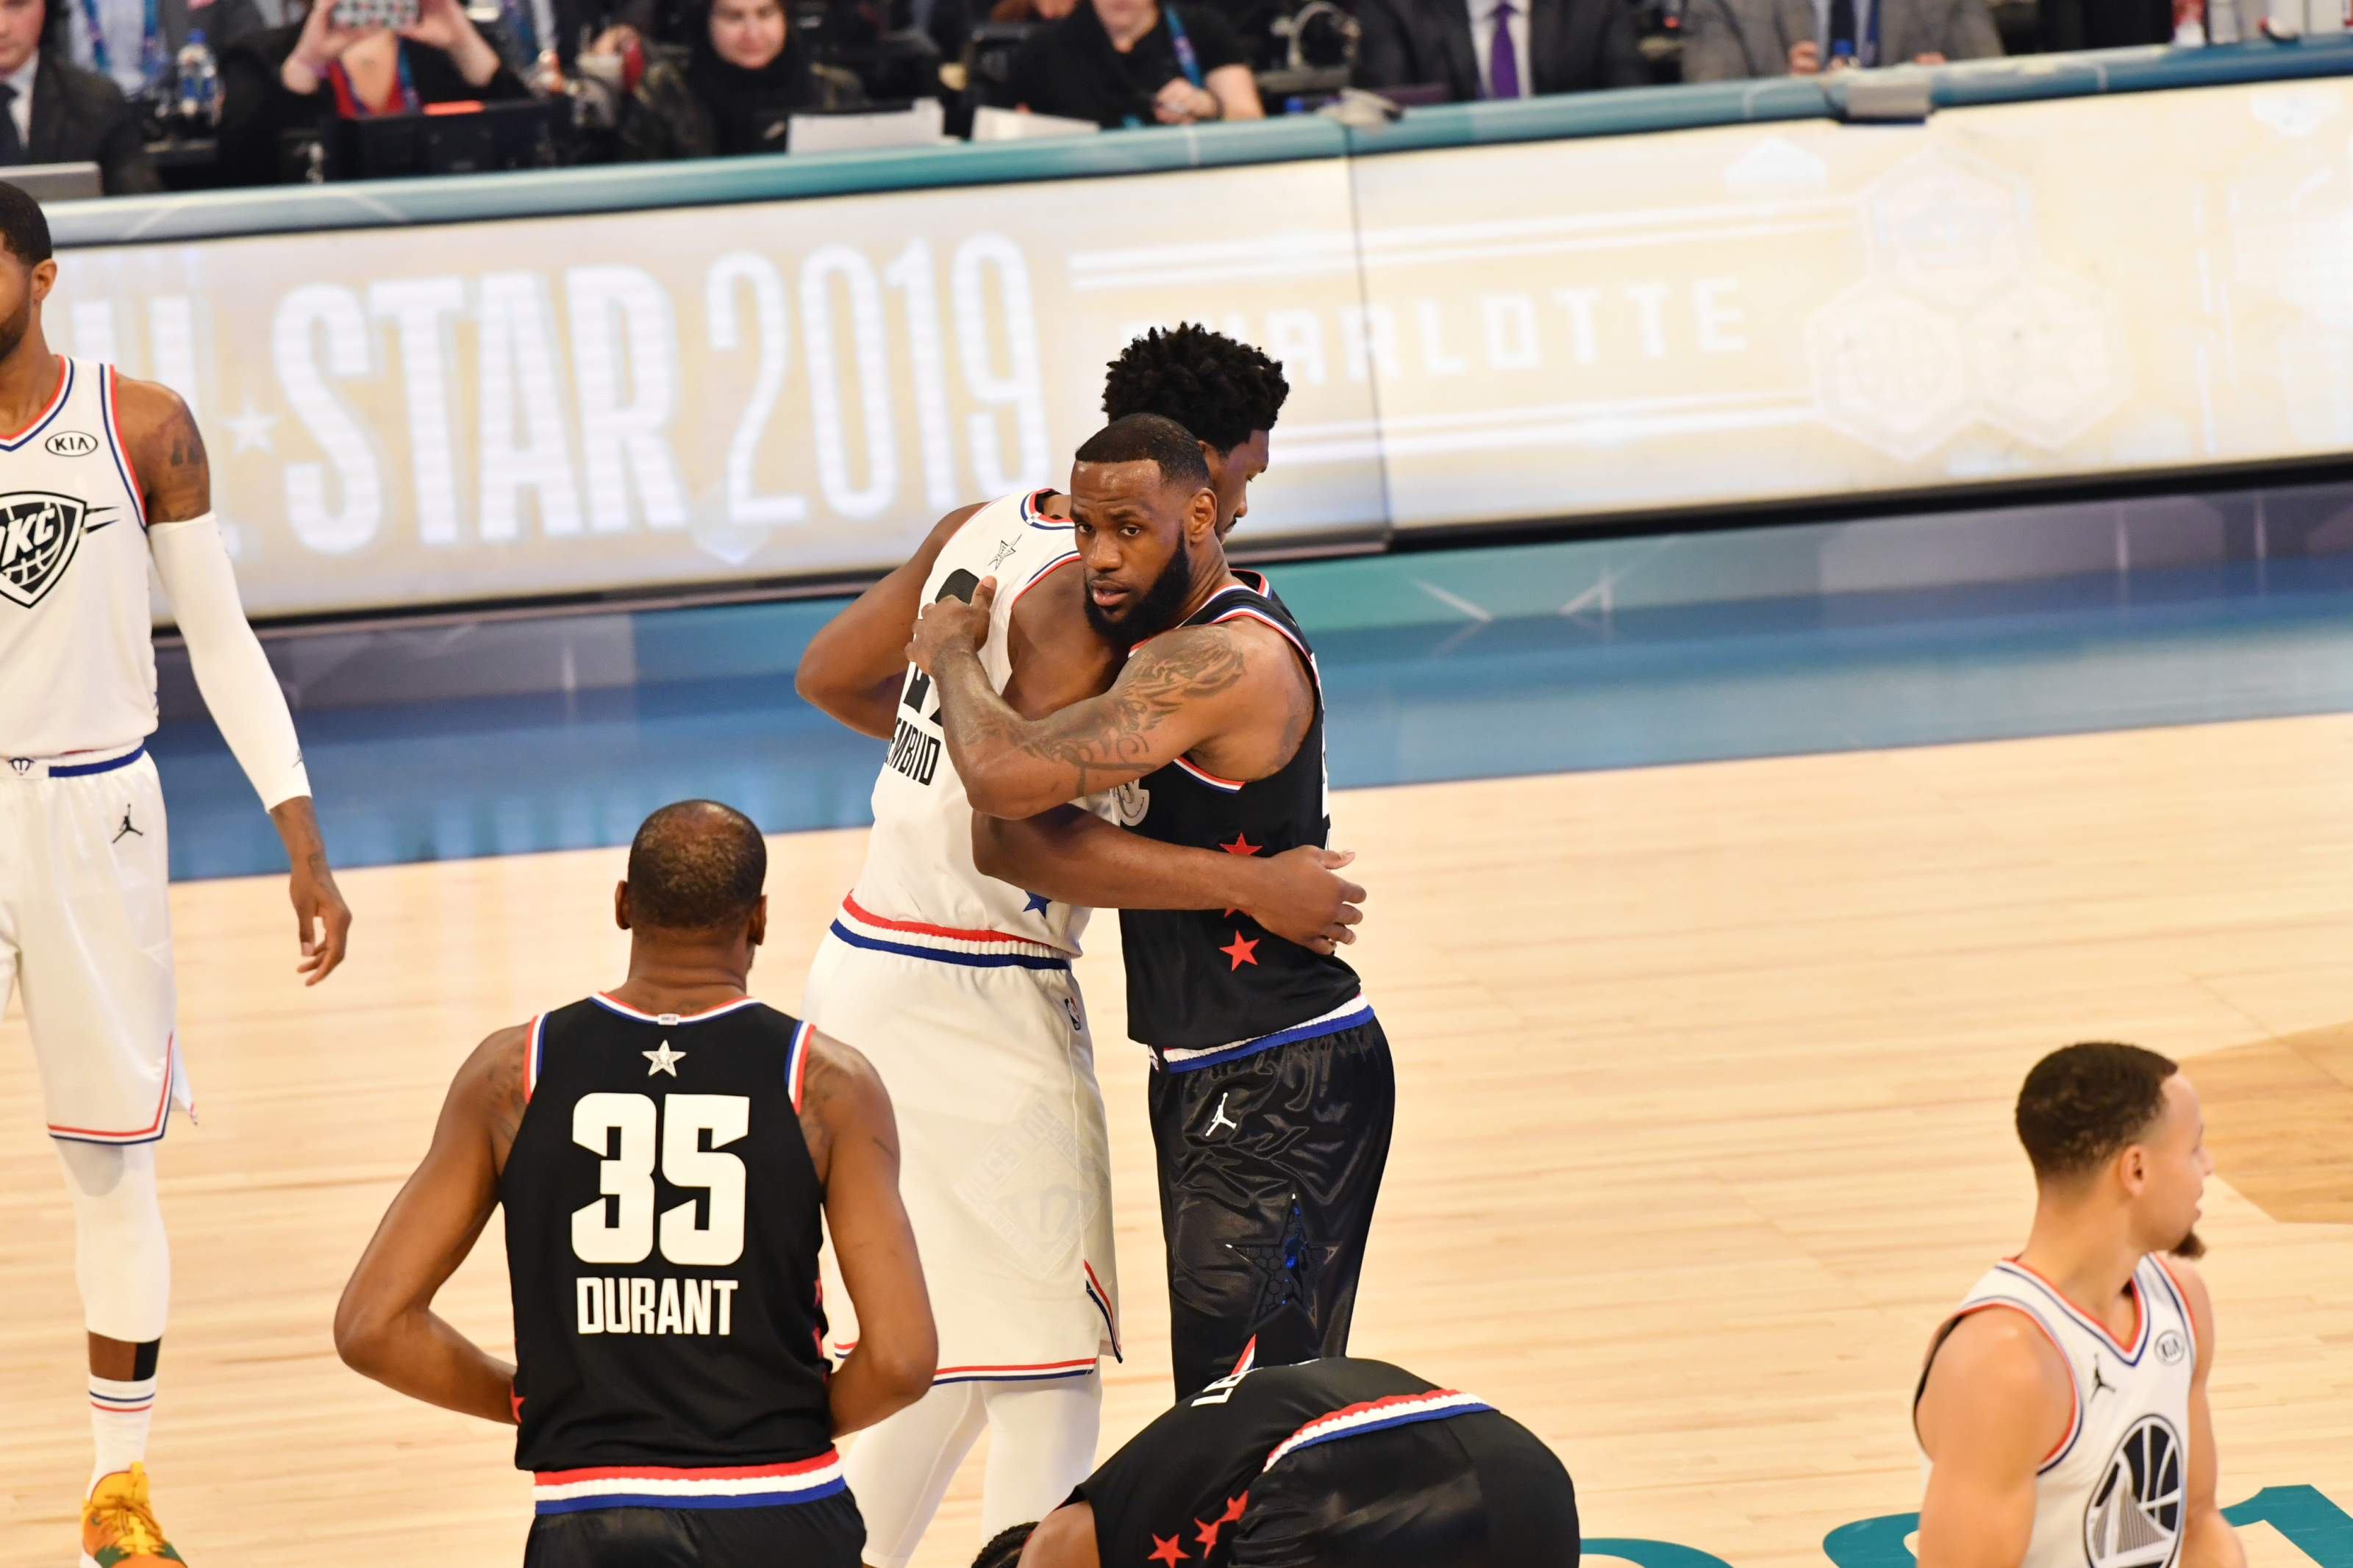 LeBron, Giannis voted as NBA All-Star Game captains